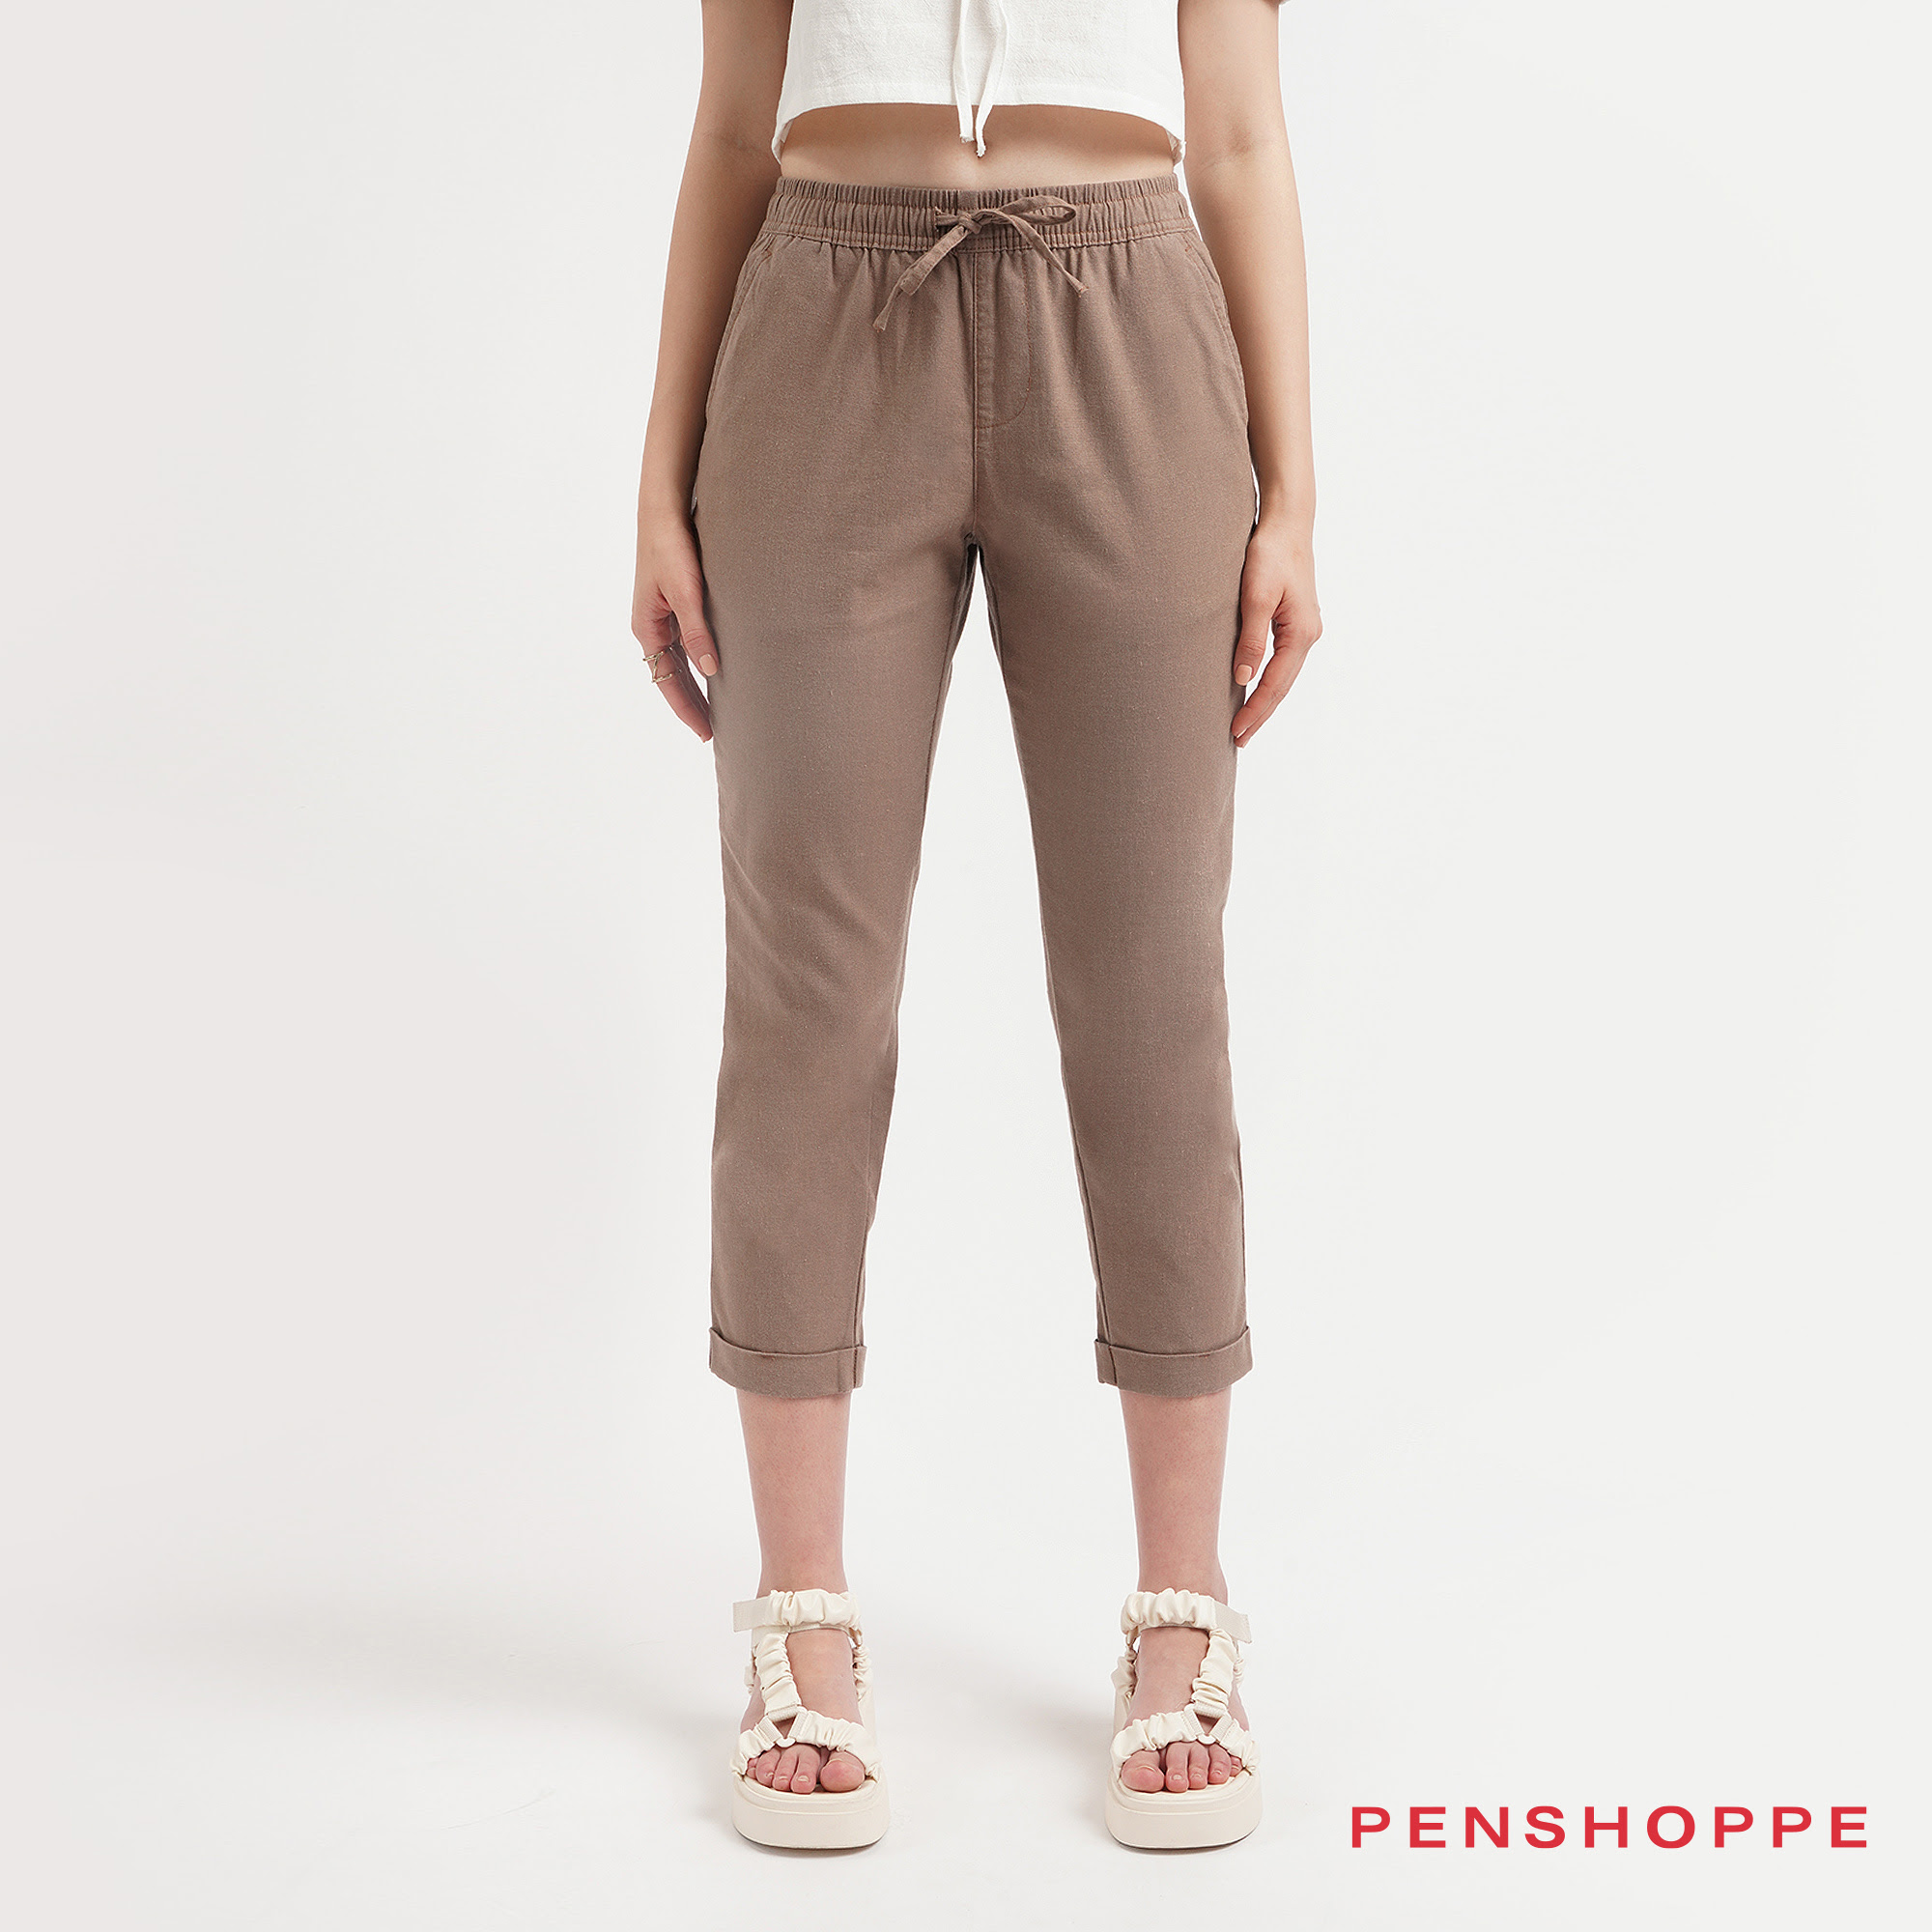 Penshoppe Chic Trousers With Pintuck Details For Women (Khaki) | Shopee  Philippines